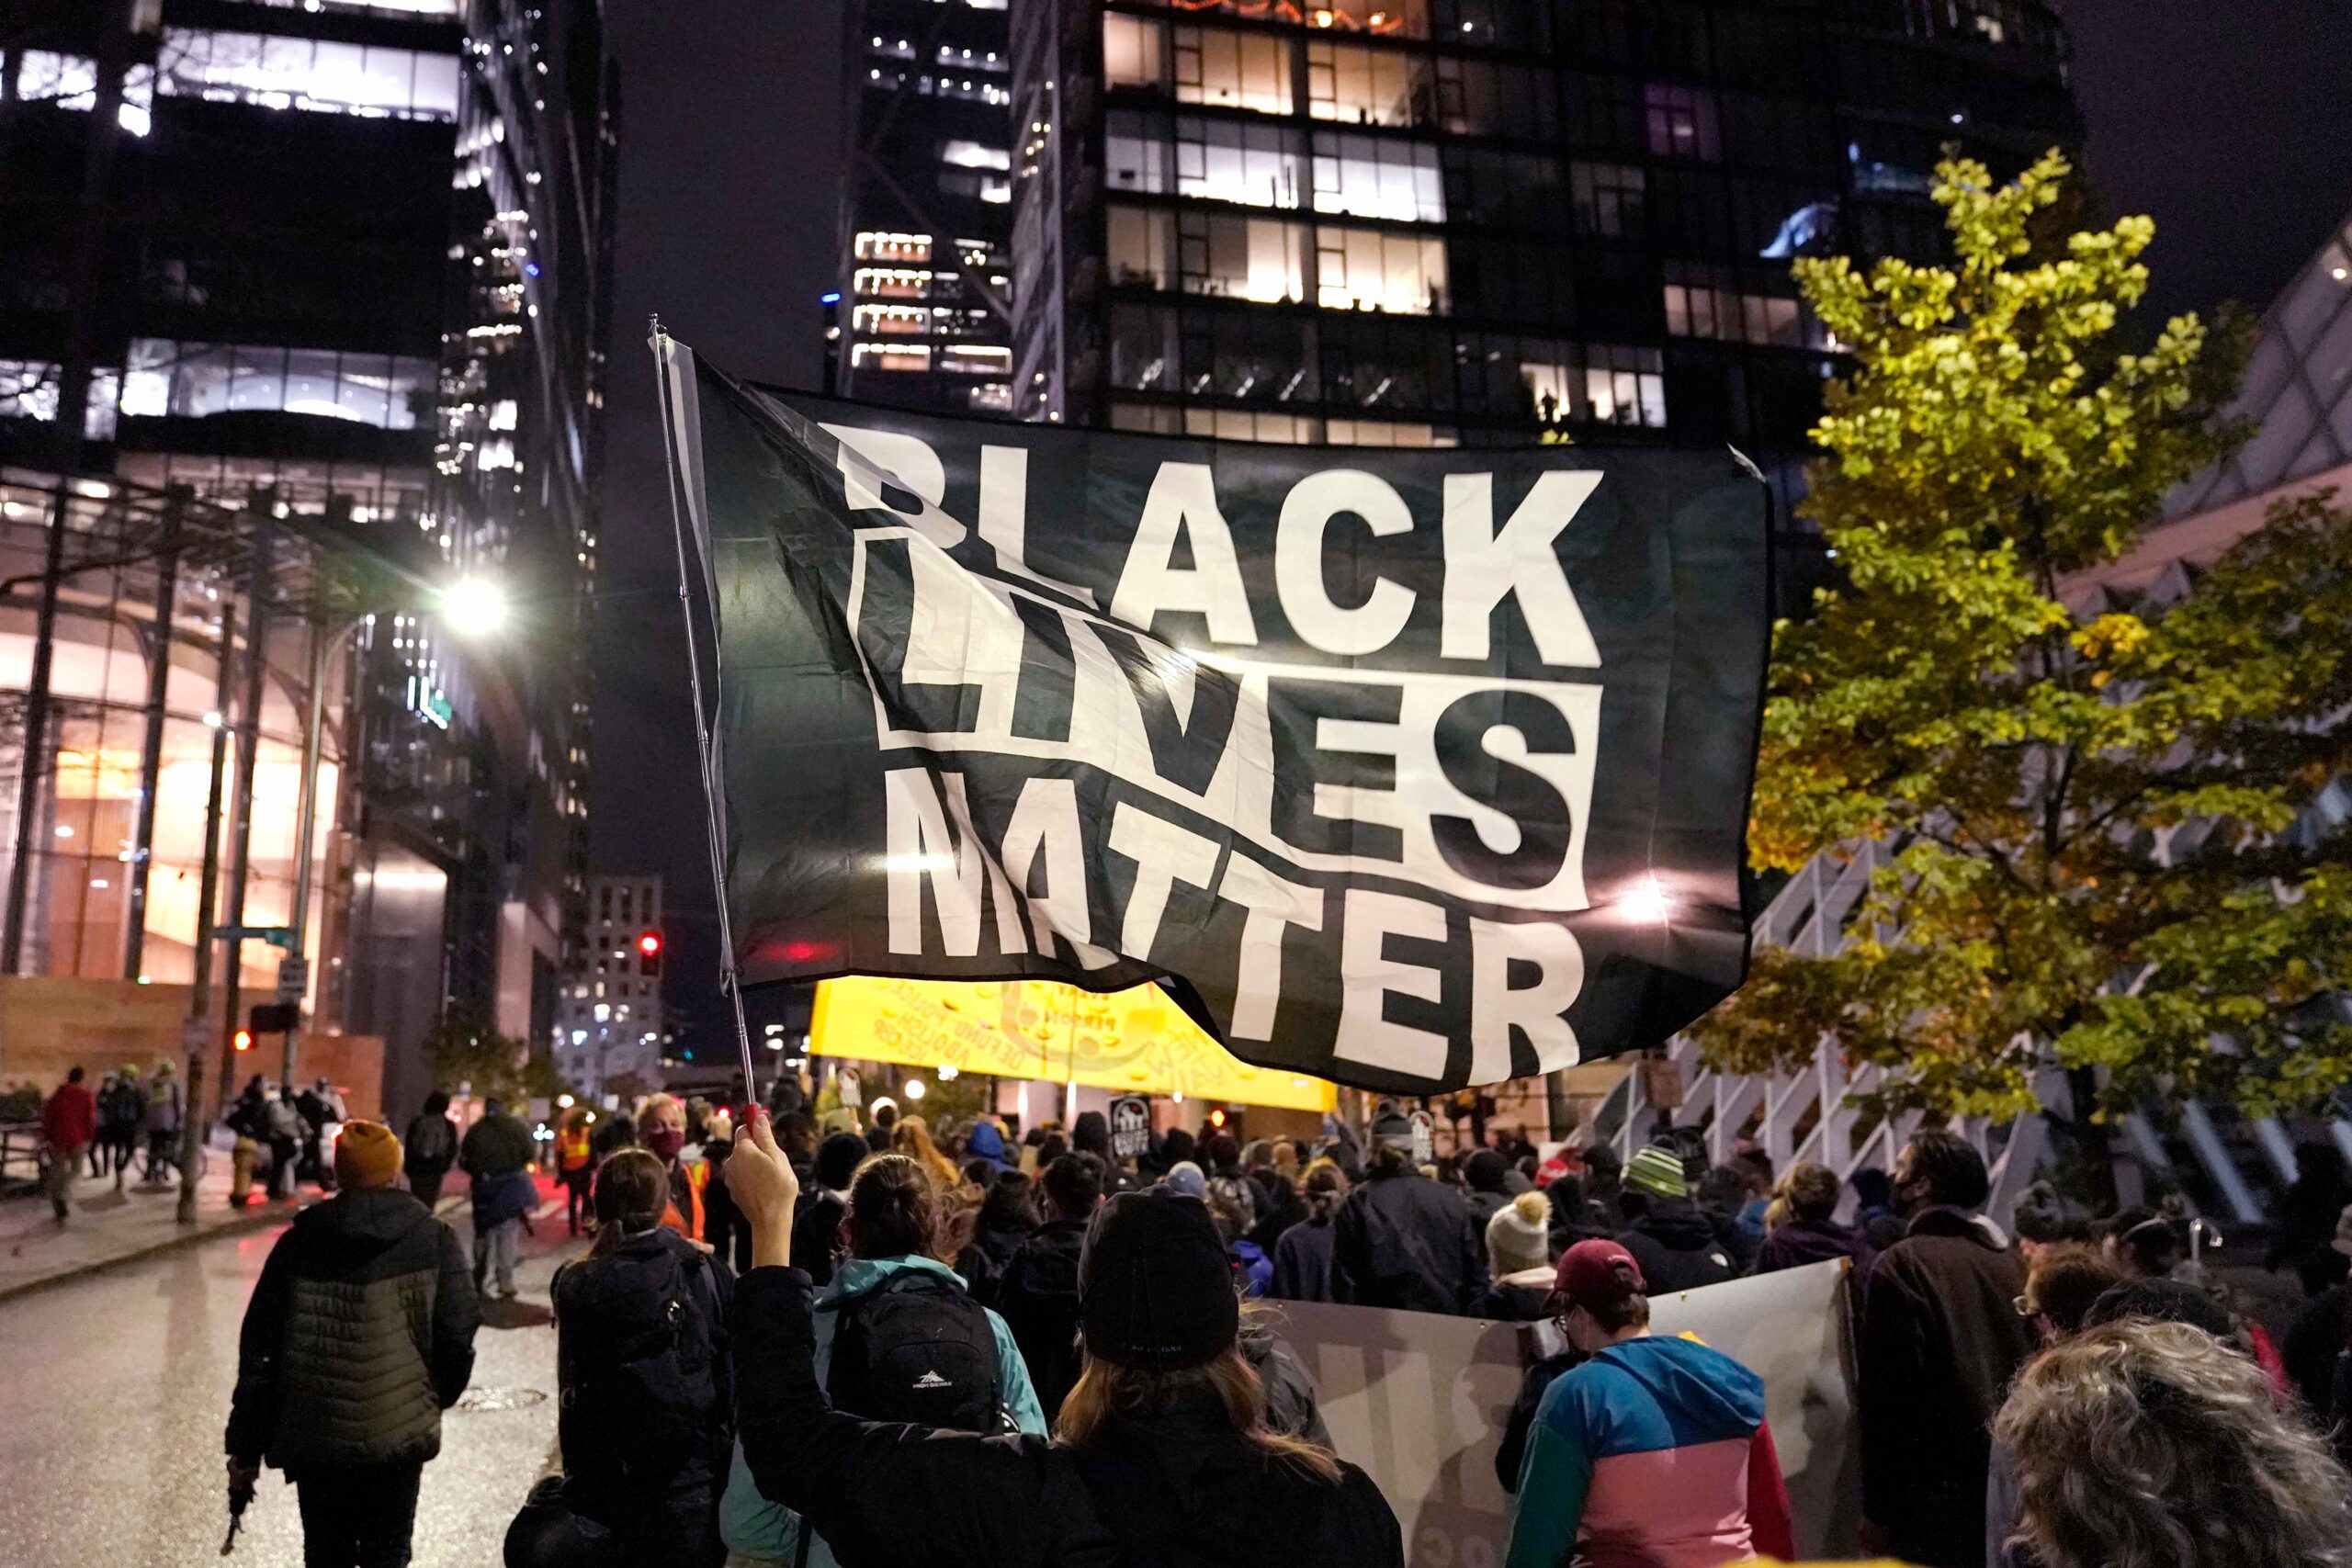 Seattle will pay $10 million to former Black Lives Matter protesters over a lawsuit brought against the police department during the BLM riots of 2020.